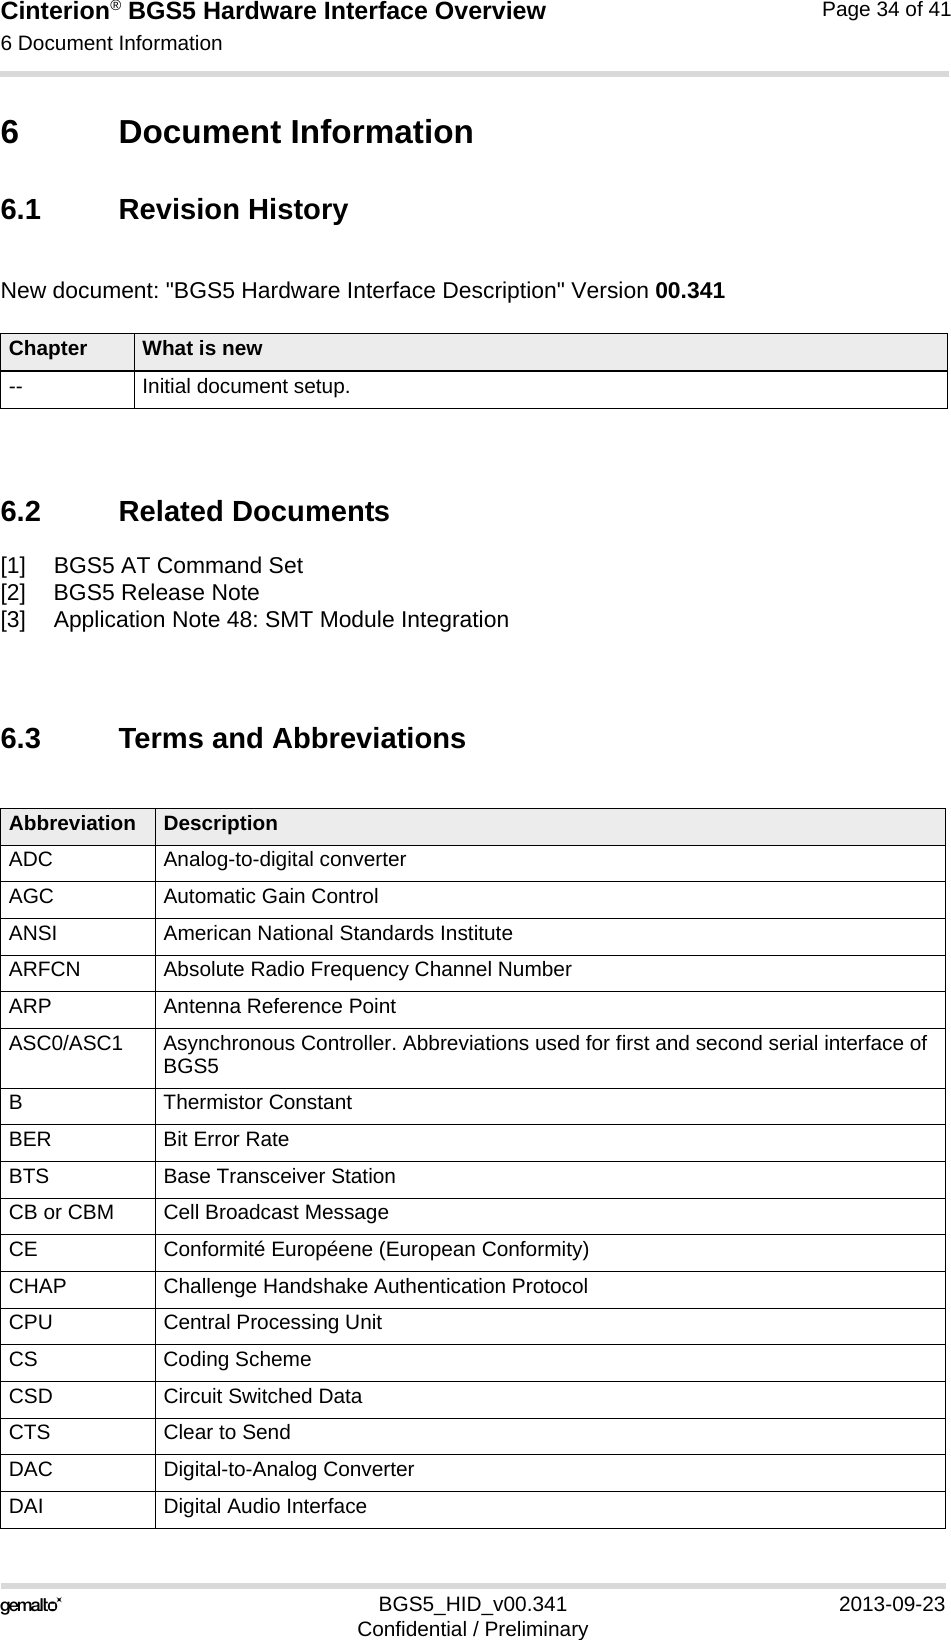 Cinterion® BGS5 Hardware Interface Overview6 Document Information38BGS5_HID_v00.341 2013-09-23Confidential / PreliminaryPage 34 of 416 Document Information6.1 Revision HistoryNew document: &quot;BGS5 Hardware Interface Description&quot; Version 00.3416.2 Related Documents[1] BGS5 AT Command Set[2] BGS5 Release Note[3] Application Note 48: SMT Module Integration6.3 Terms and AbbreviationsChapter What is new-- Initial document setup.Abbreviation DescriptionADC Analog-to-digital converterAGC Automatic Gain ControlANSI American National Standards InstituteARFCN Absolute Radio Frequency Channel NumberARP Antenna Reference PointASC0/ASC1 Asynchronous Controller. Abbreviations used for first and second serial interface of BGS5B Thermistor ConstantBER Bit Error RateBTS Base Transceiver StationCB or CBM Cell Broadcast MessageCE Conformité Européene (European Conformity)CHAP Challenge Handshake Authentication ProtocolCPU Central Processing UnitCS Coding SchemeCSD Circuit Switched DataCTS Clear to SendDAC Digital-to-Analog ConverterDAI Digital Audio Interface